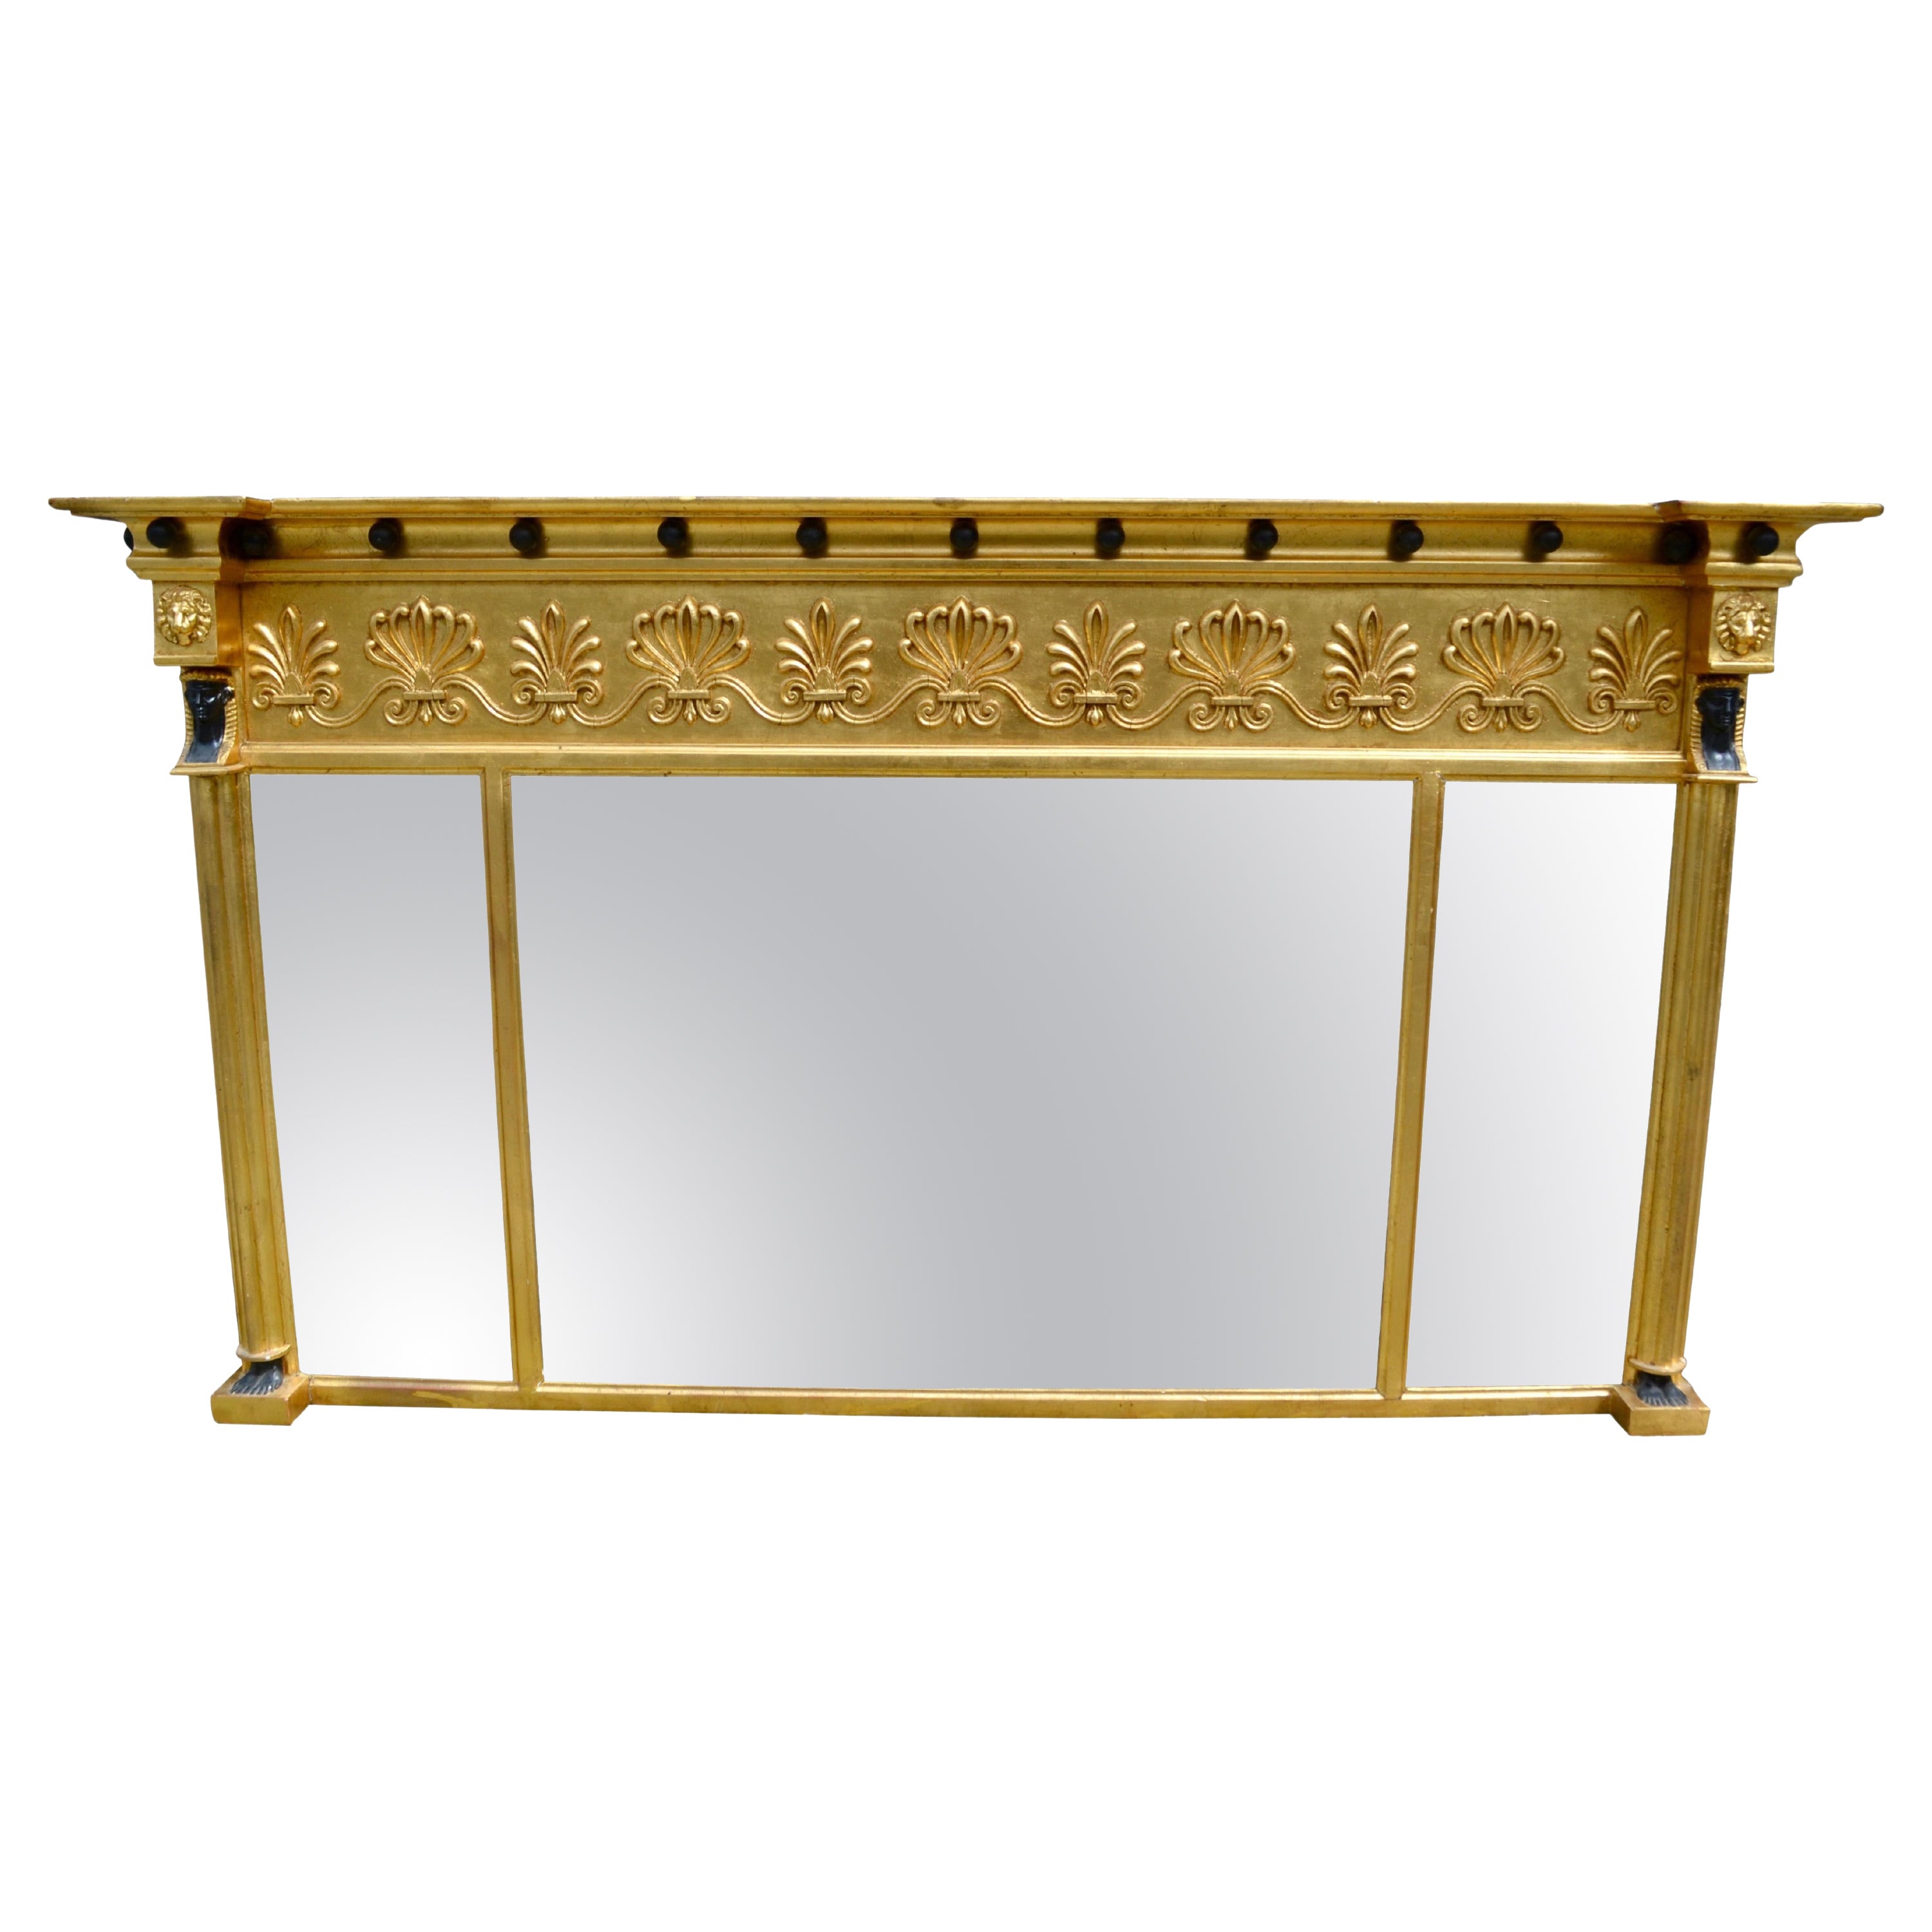 19 Century English Regency Neo Classical Gilt Wood Mirror For Sale